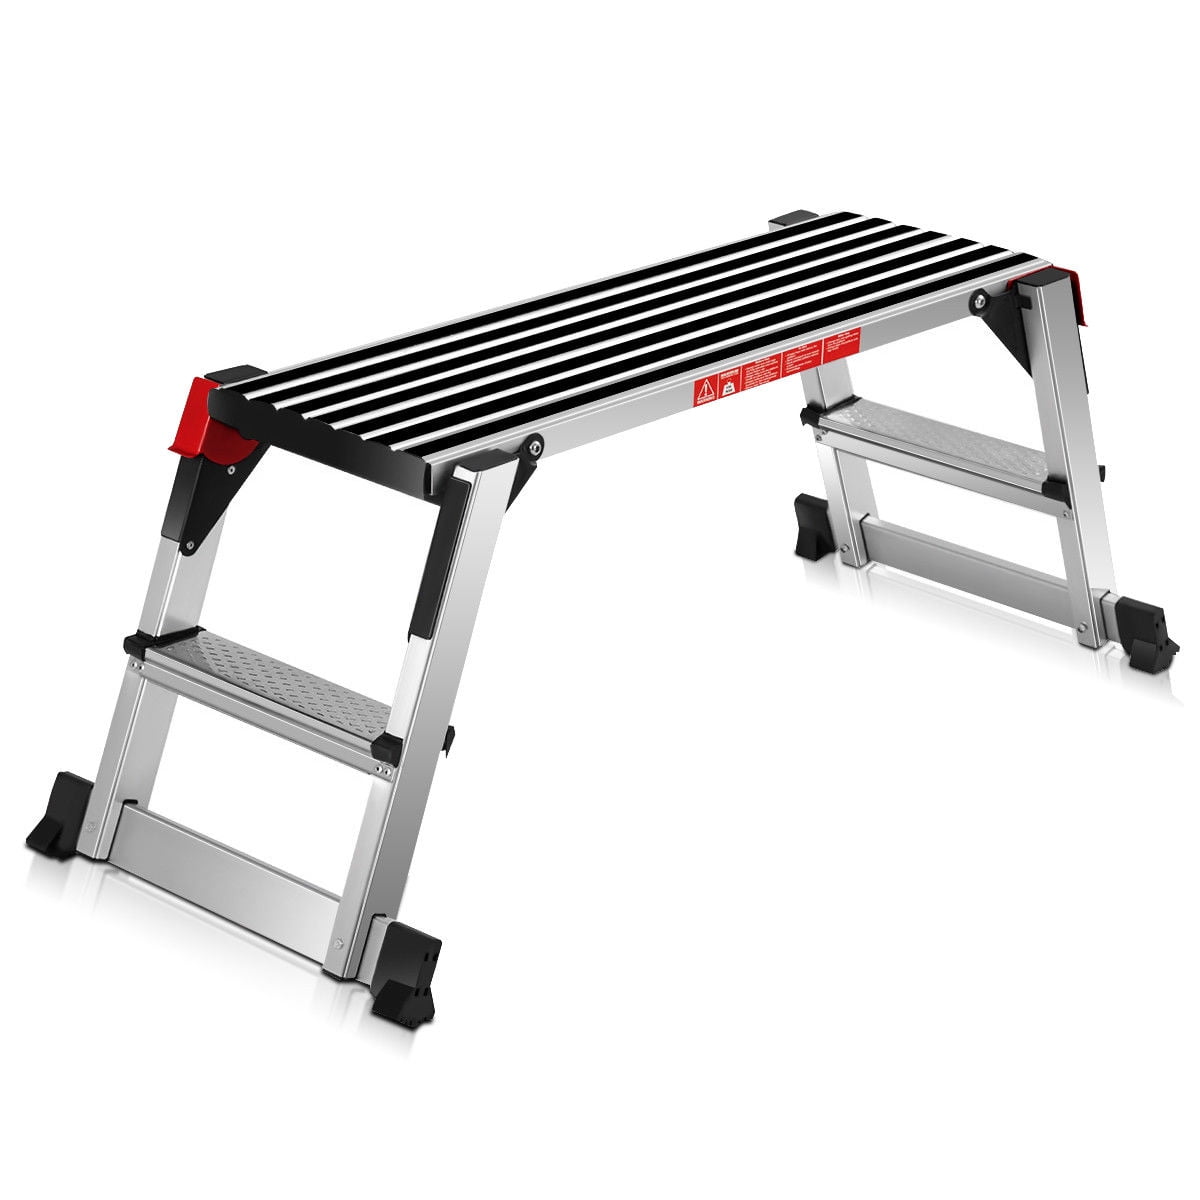 Step Stool and Working Platform 350 Lbs Capacity Foldable Anodized Aluminum by Haul-Master